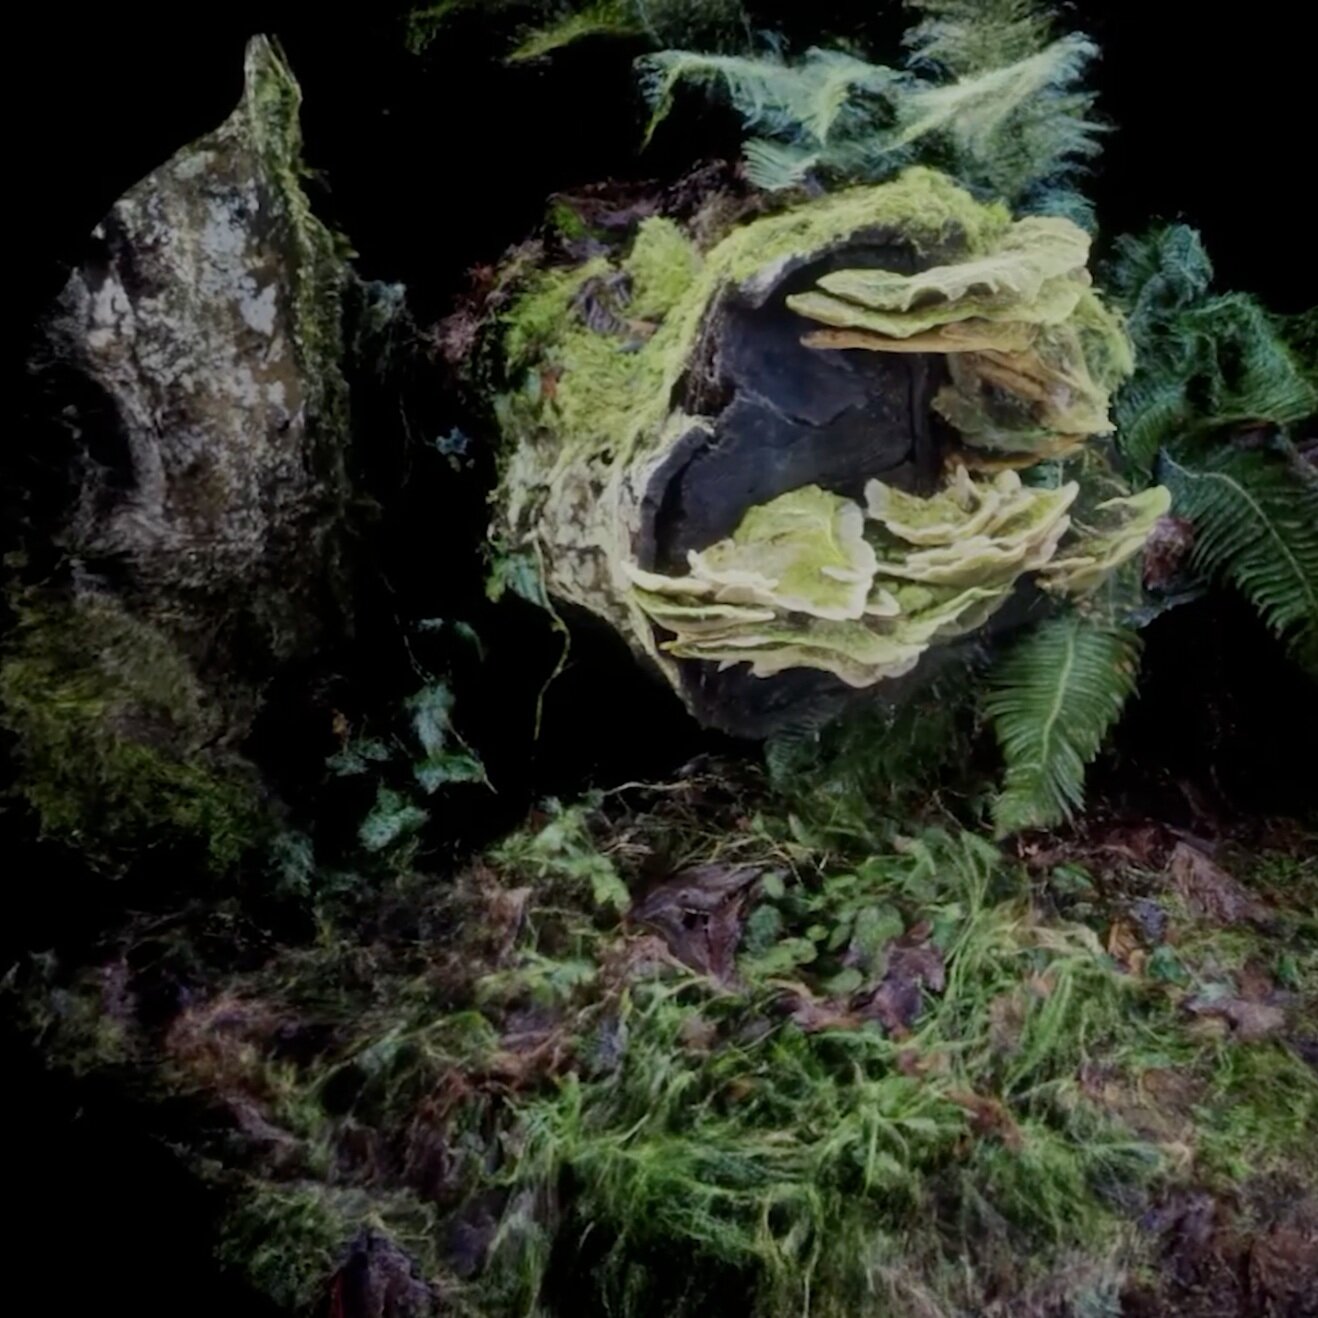   Symbiosis/Dysbiosis immersive, mixed reality experience, in VR environment shot. Point cloud data scanned from Canadian coastal rainforests connected to living mycelium which is reacting to Human touch and effecting the point cloud visual . Current